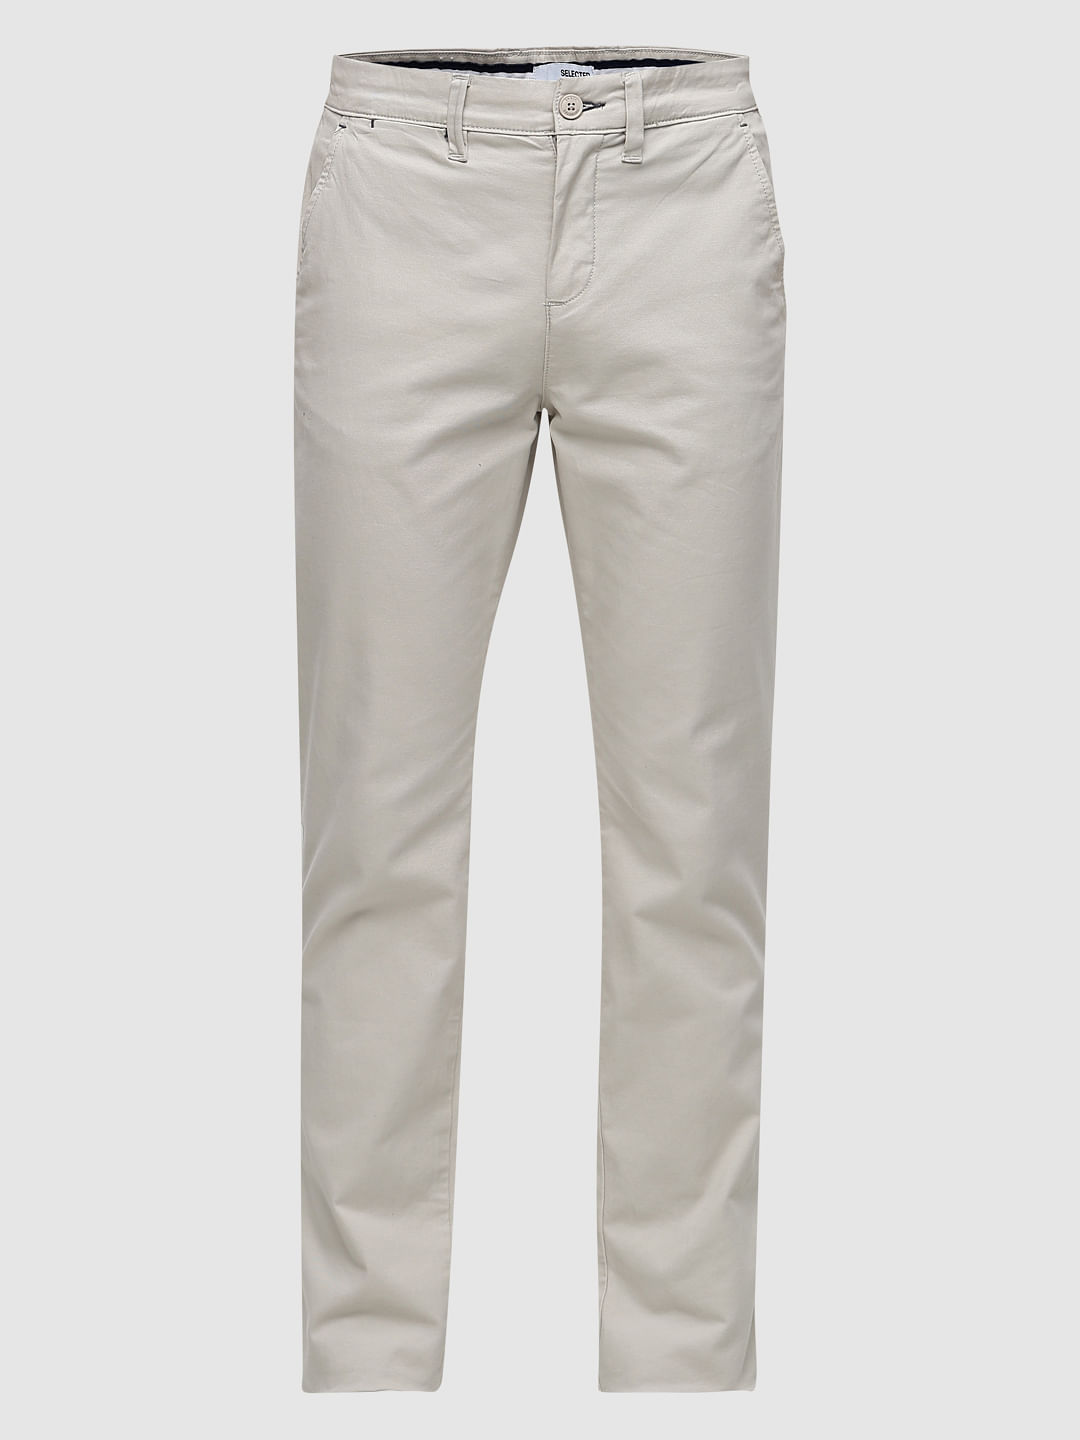 Super Comfy Men's Pants - White Chinos with Elastic Drawstring Waist |  Eight X – Eight-X